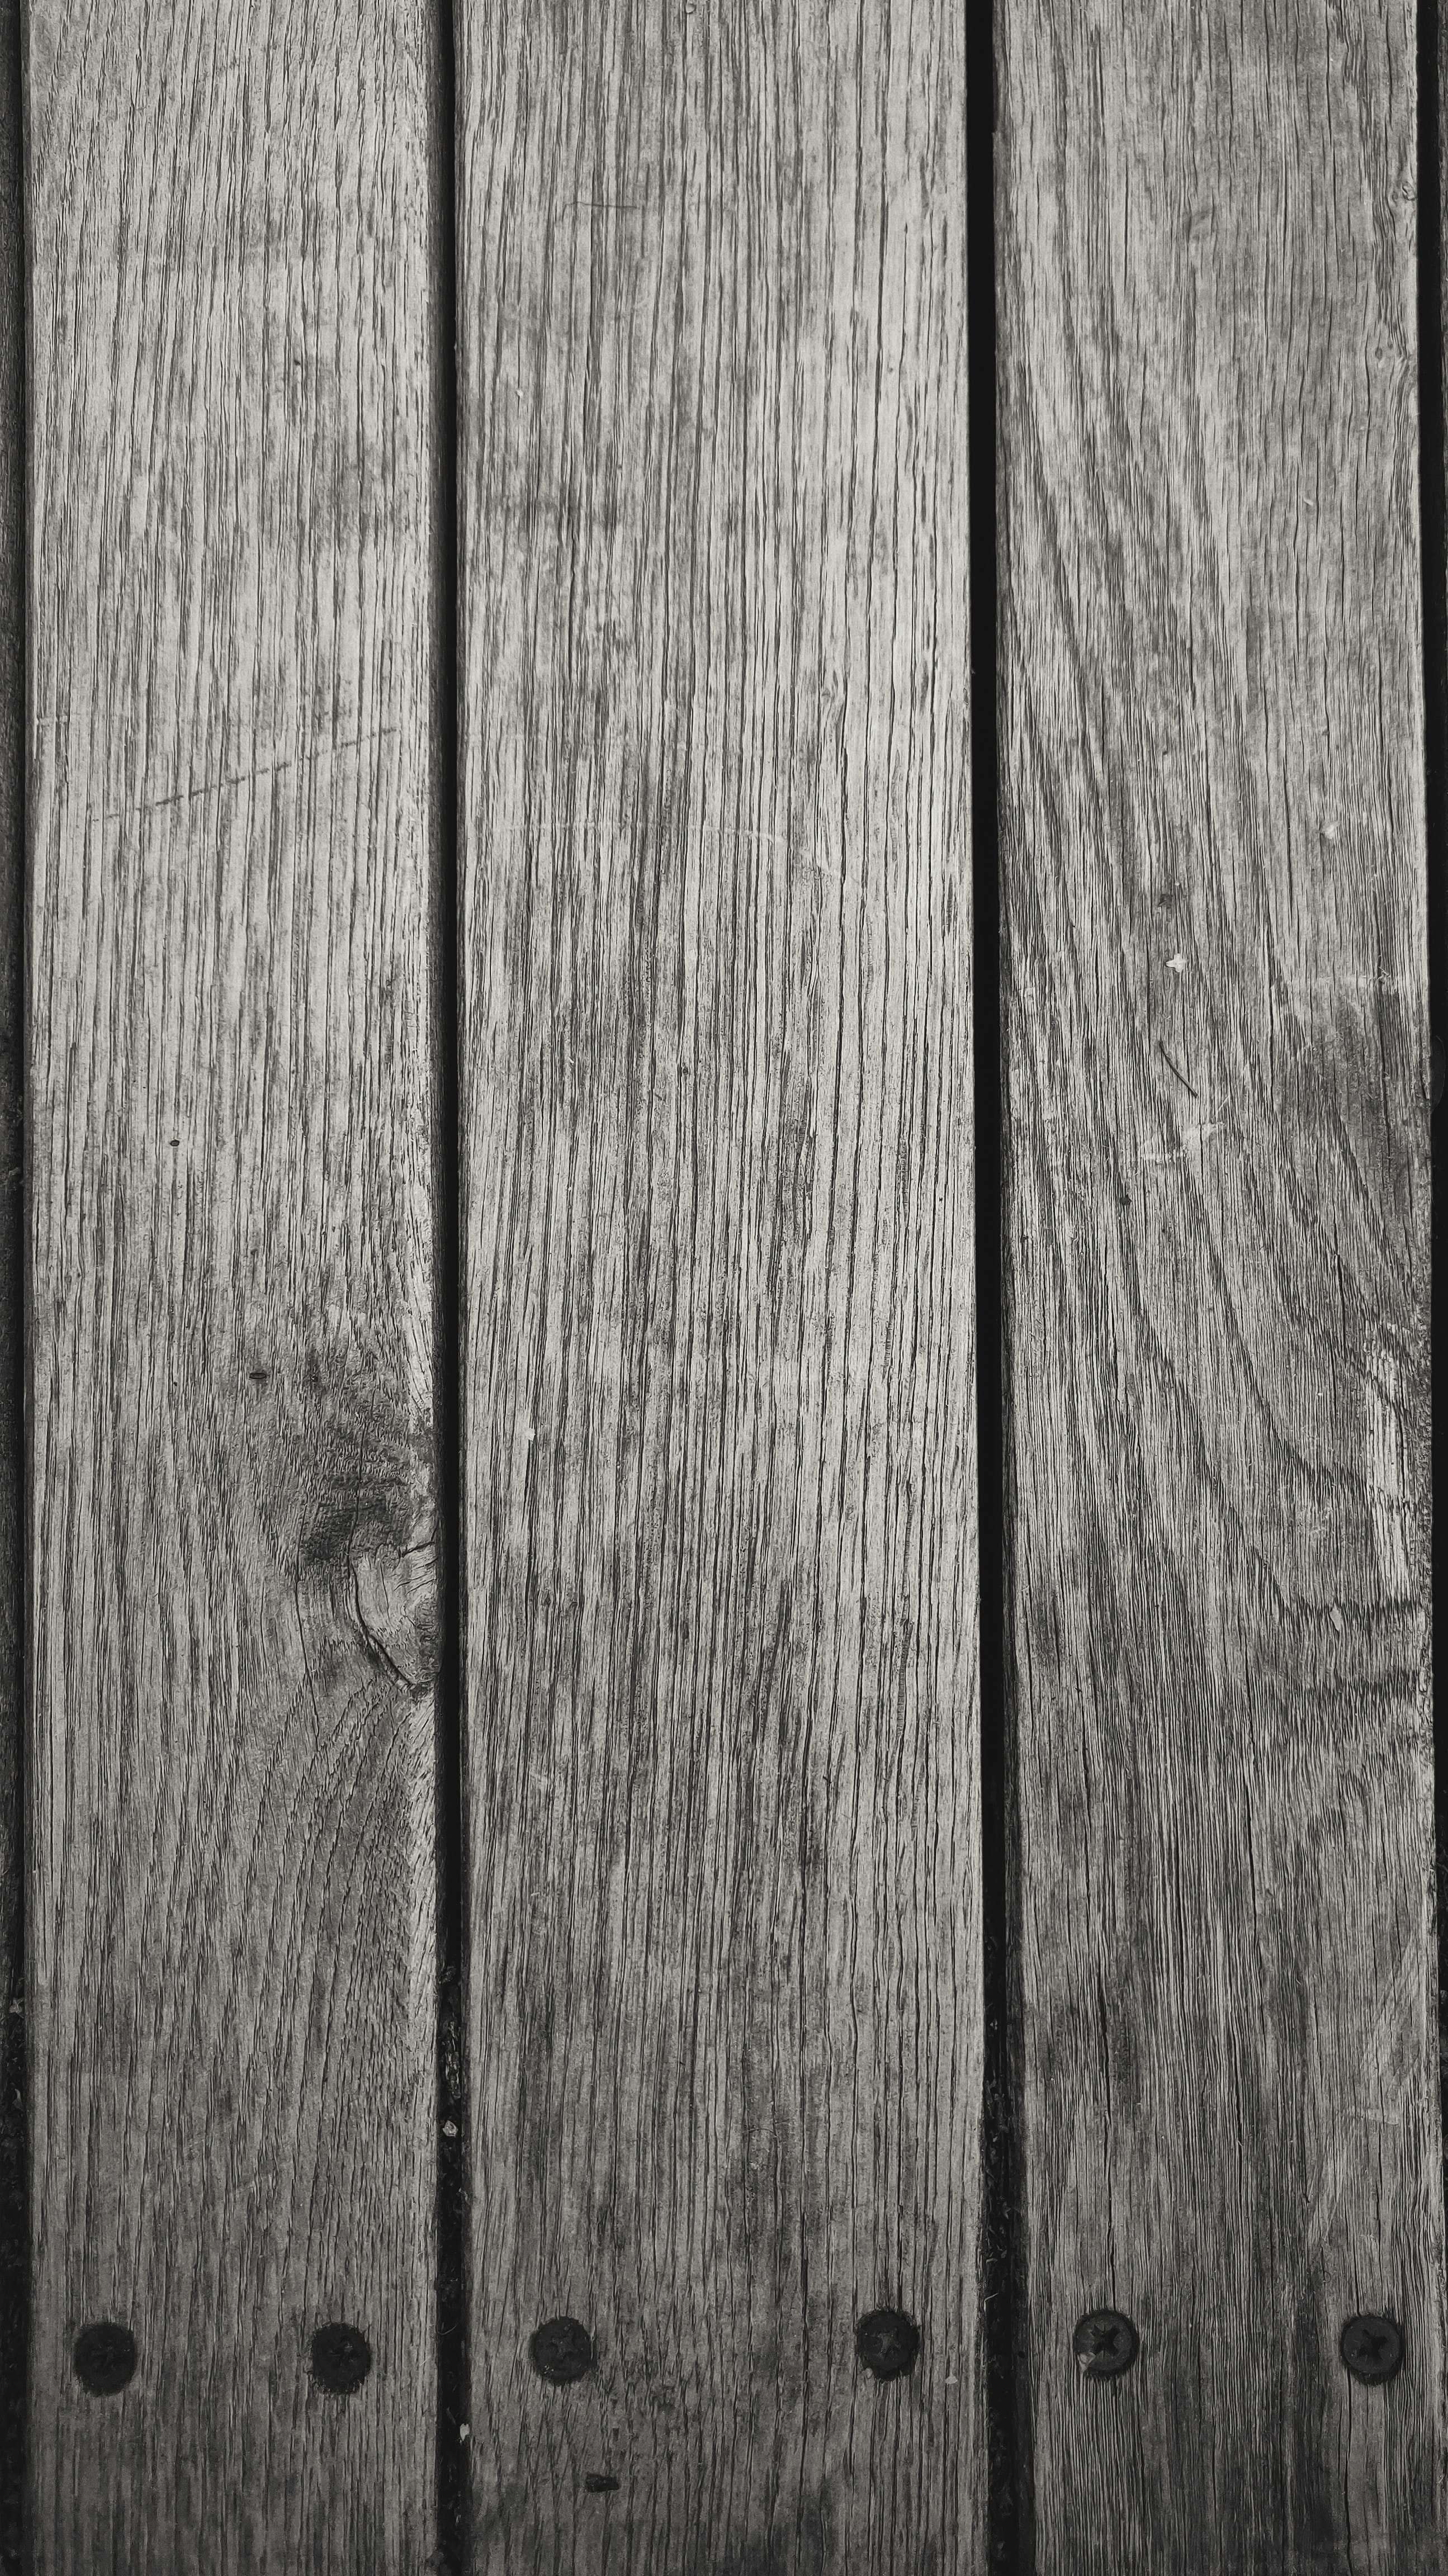 wooden, wood, texture, textures, surface, bw, chb, planks, board